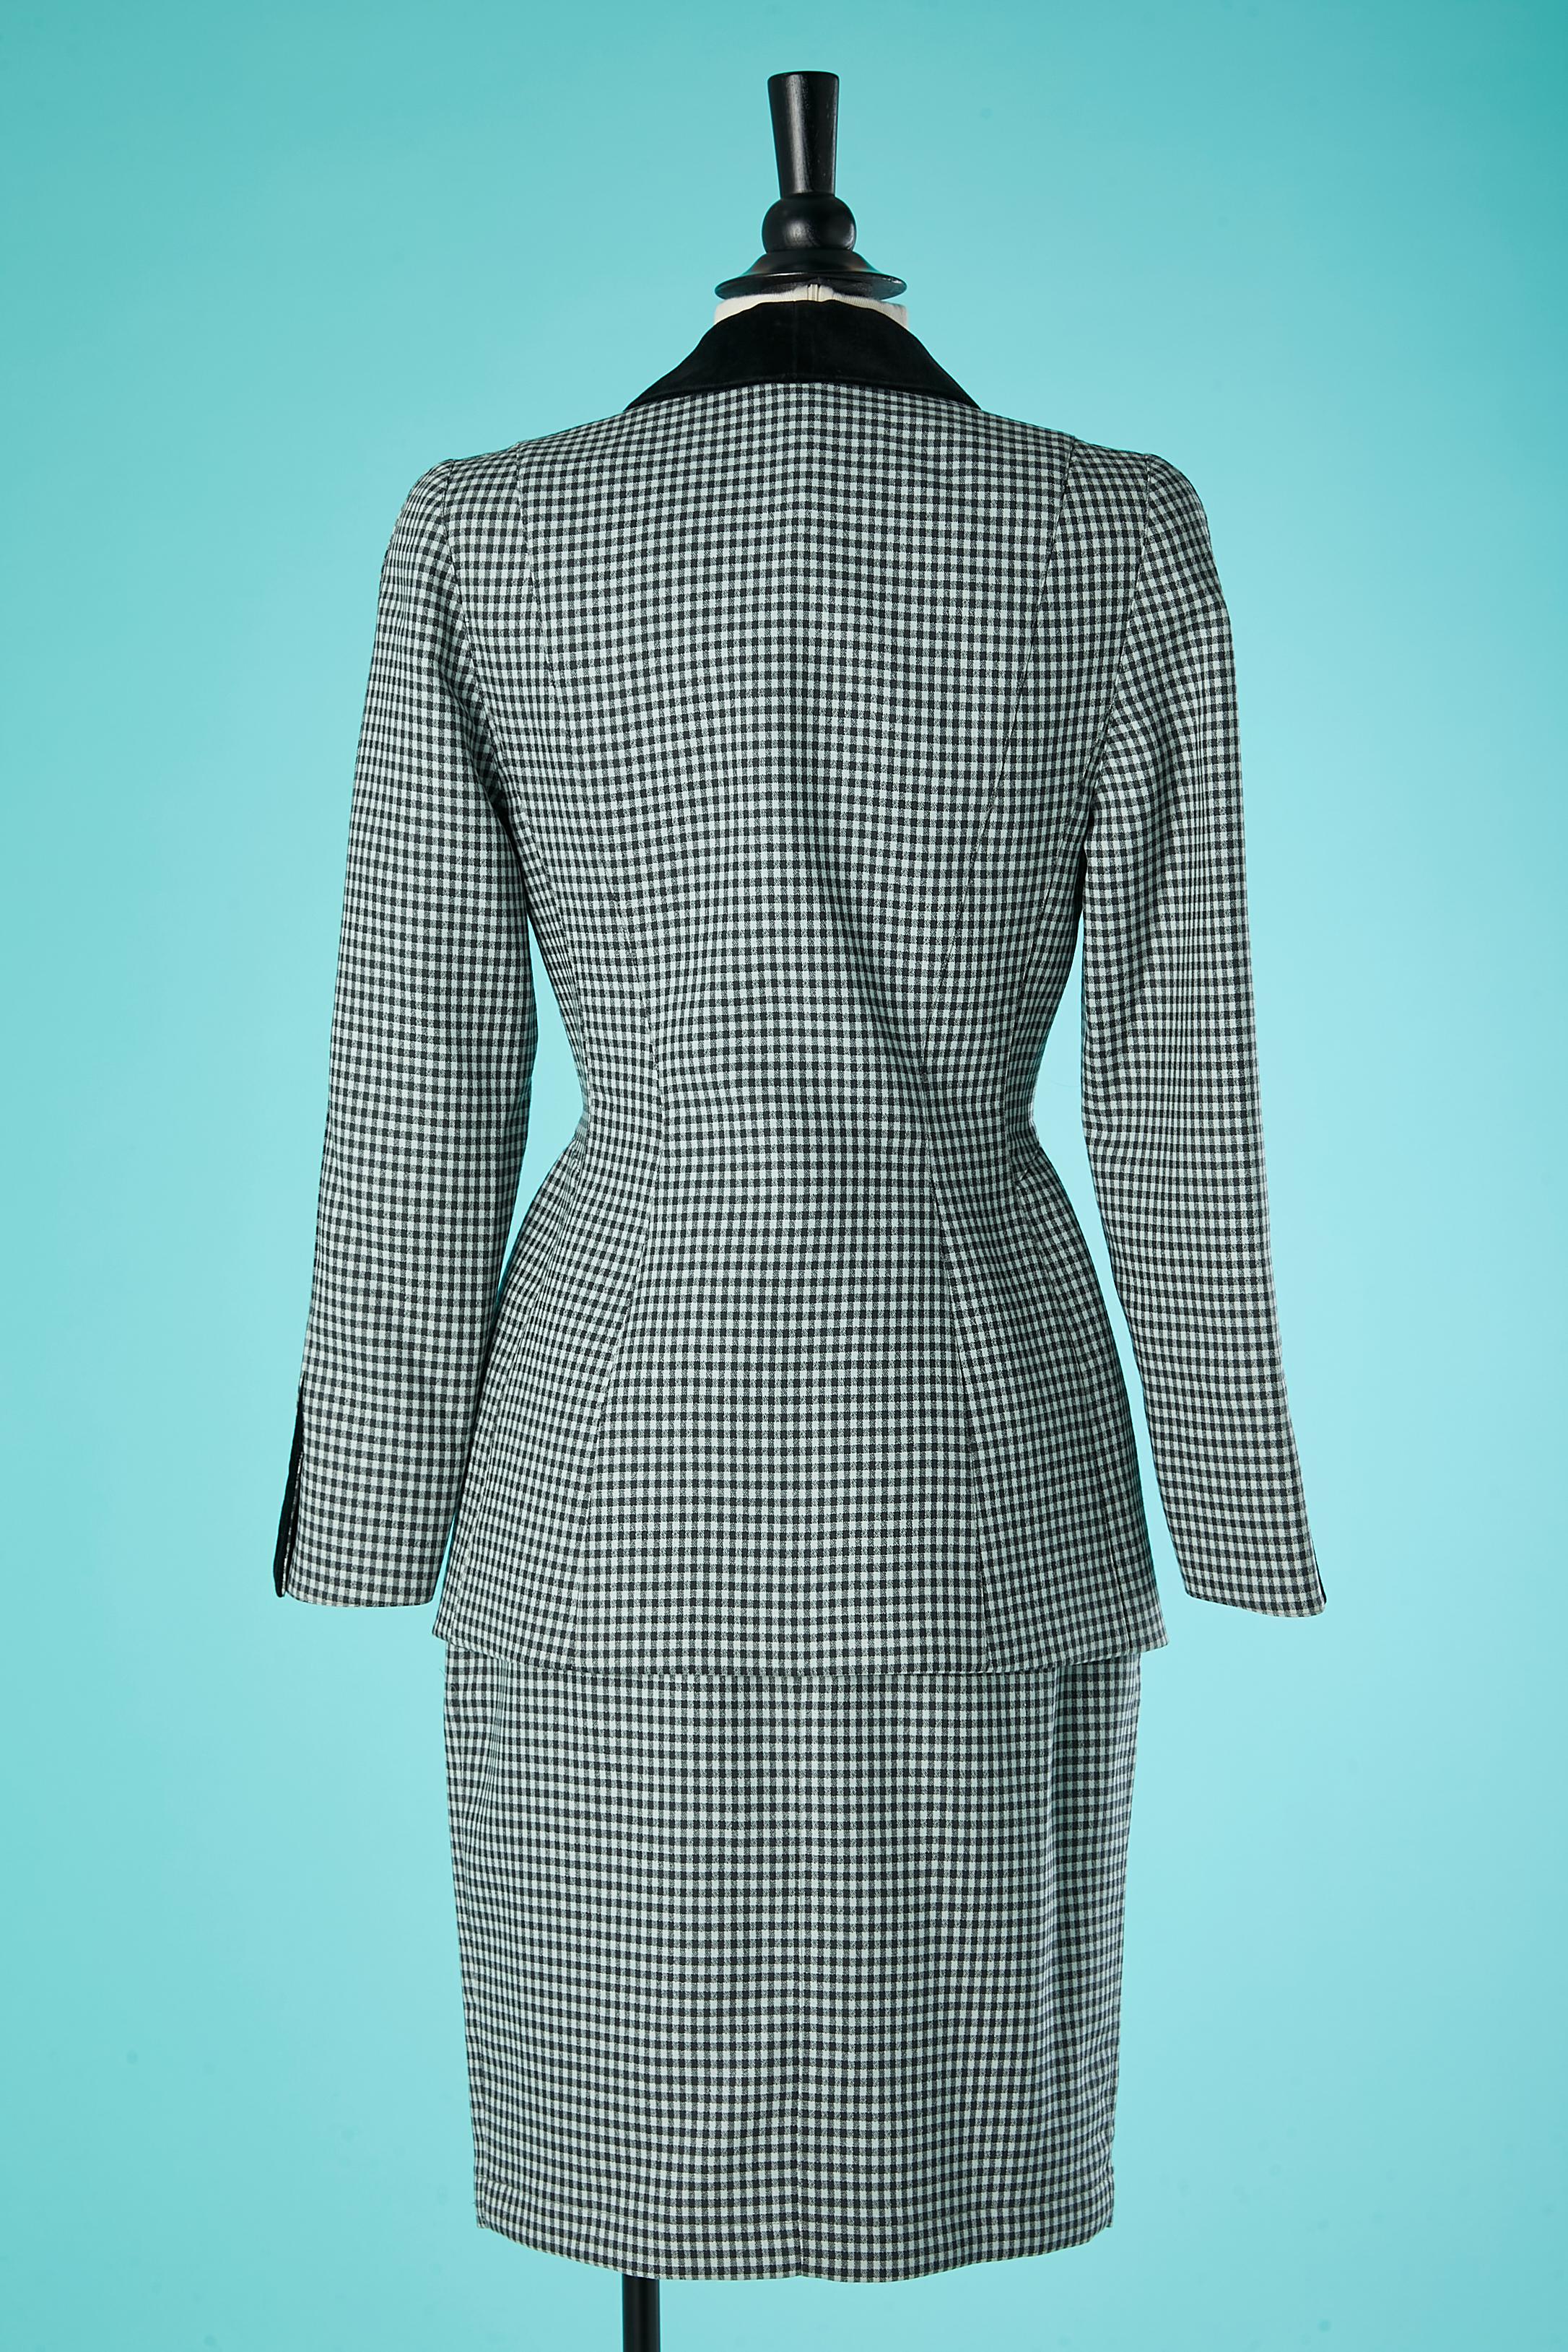 Wool and velvet skirt-suit in mini check pattern Thierry Mugler  For Sale 2